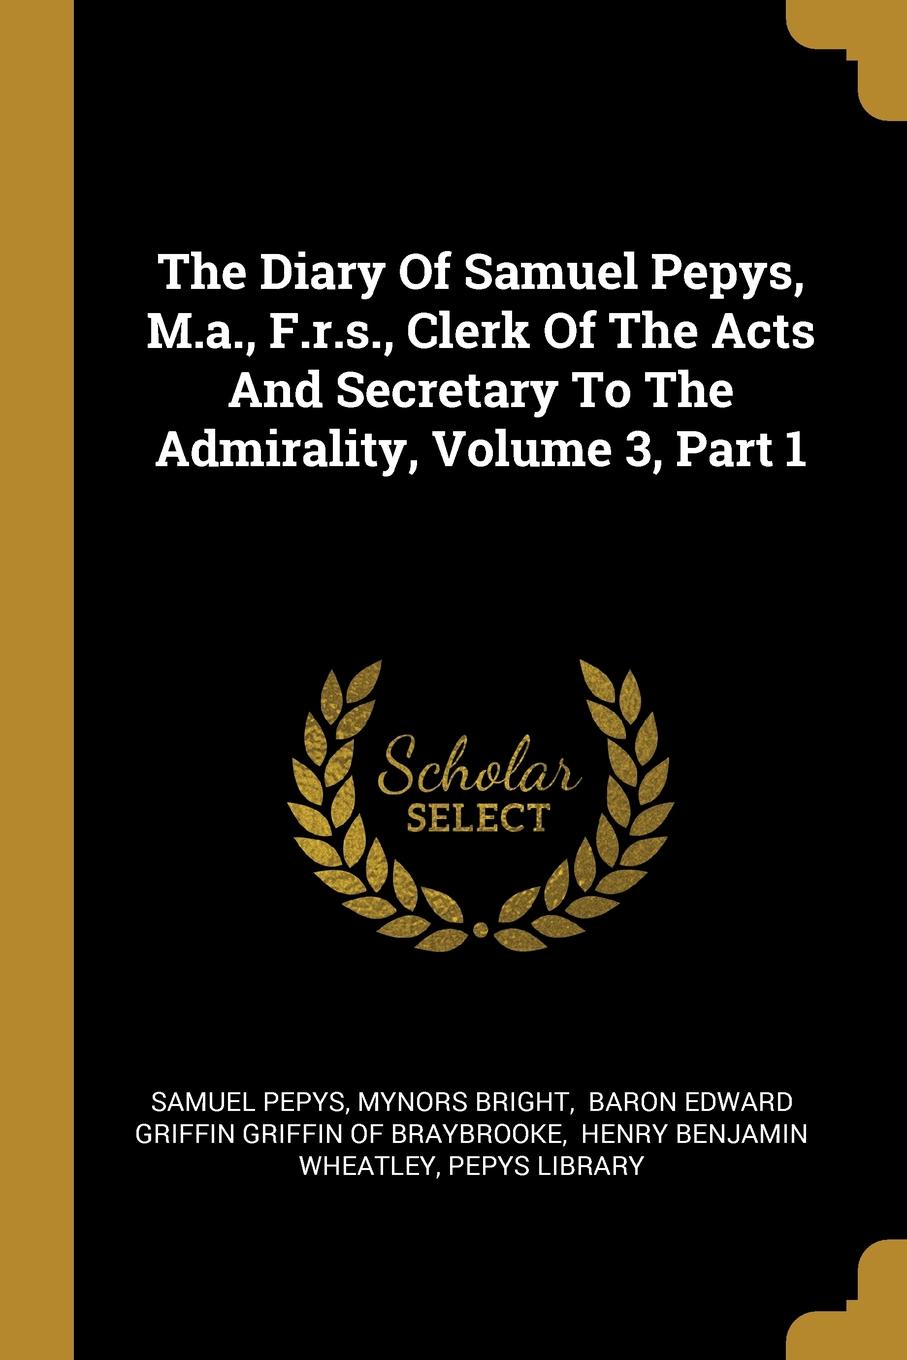 The Diary Of Samuel Pepys, M.a., F.r.s., Clerk Of The Acts And Secretary To The Admirality, Volume 3, Part 1